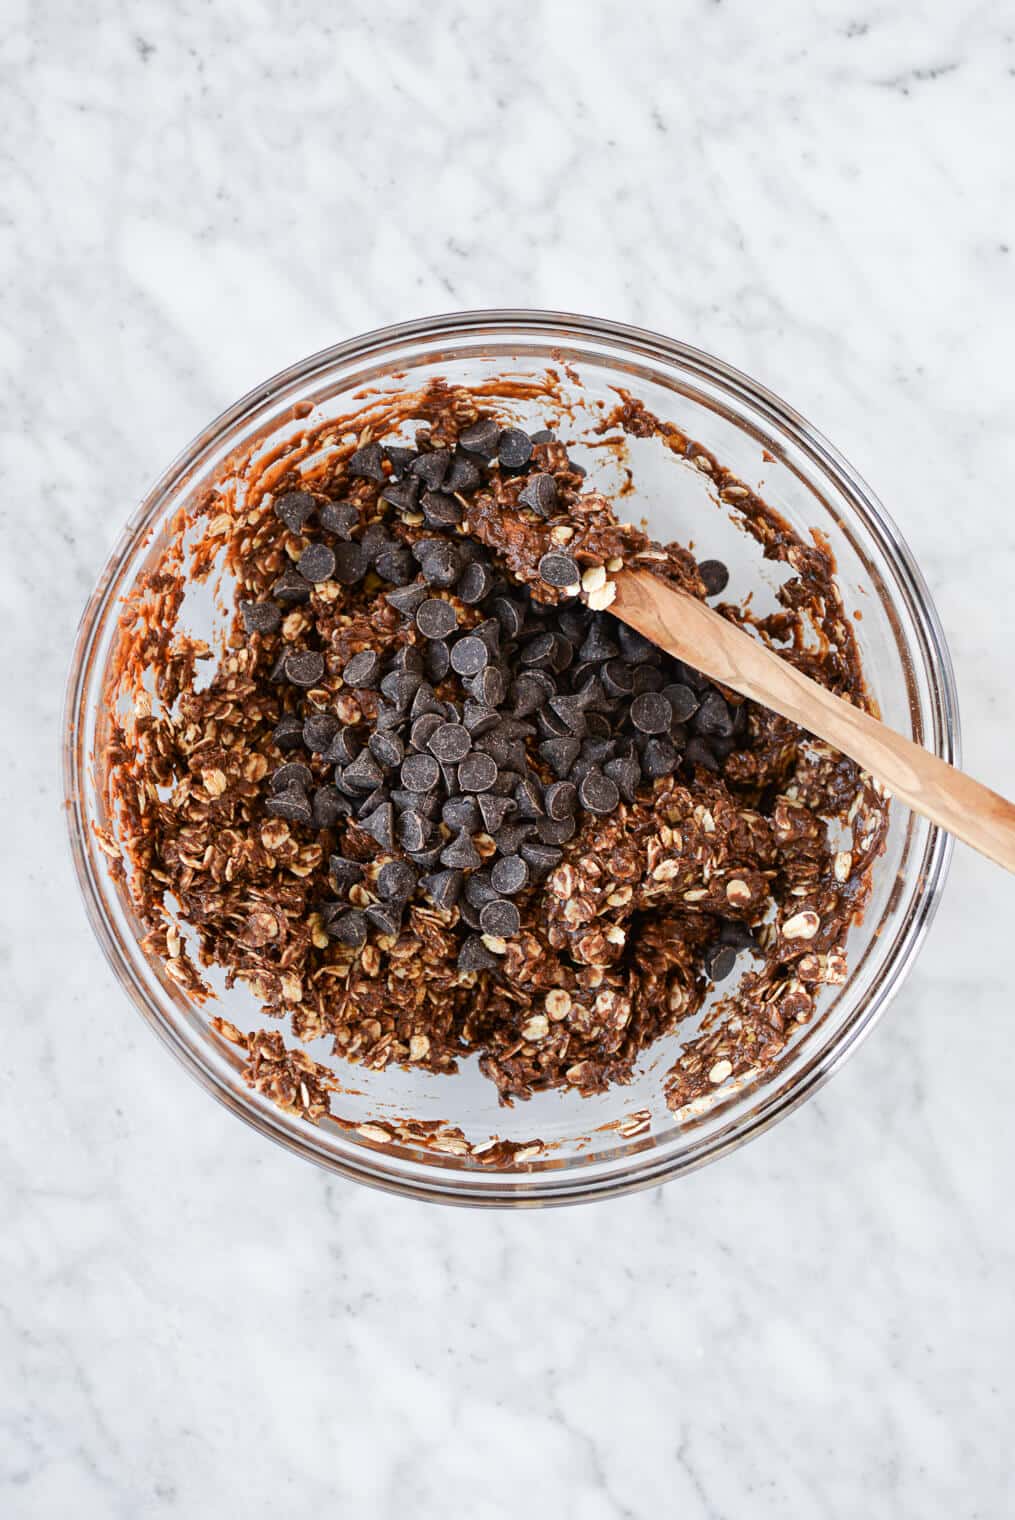 a maple syrup, cocoa powder, coconut oil, and vanilla extract mixture combined with oats and chocolate chips in a large glass bowl with a wooden spoon all on a marble surface